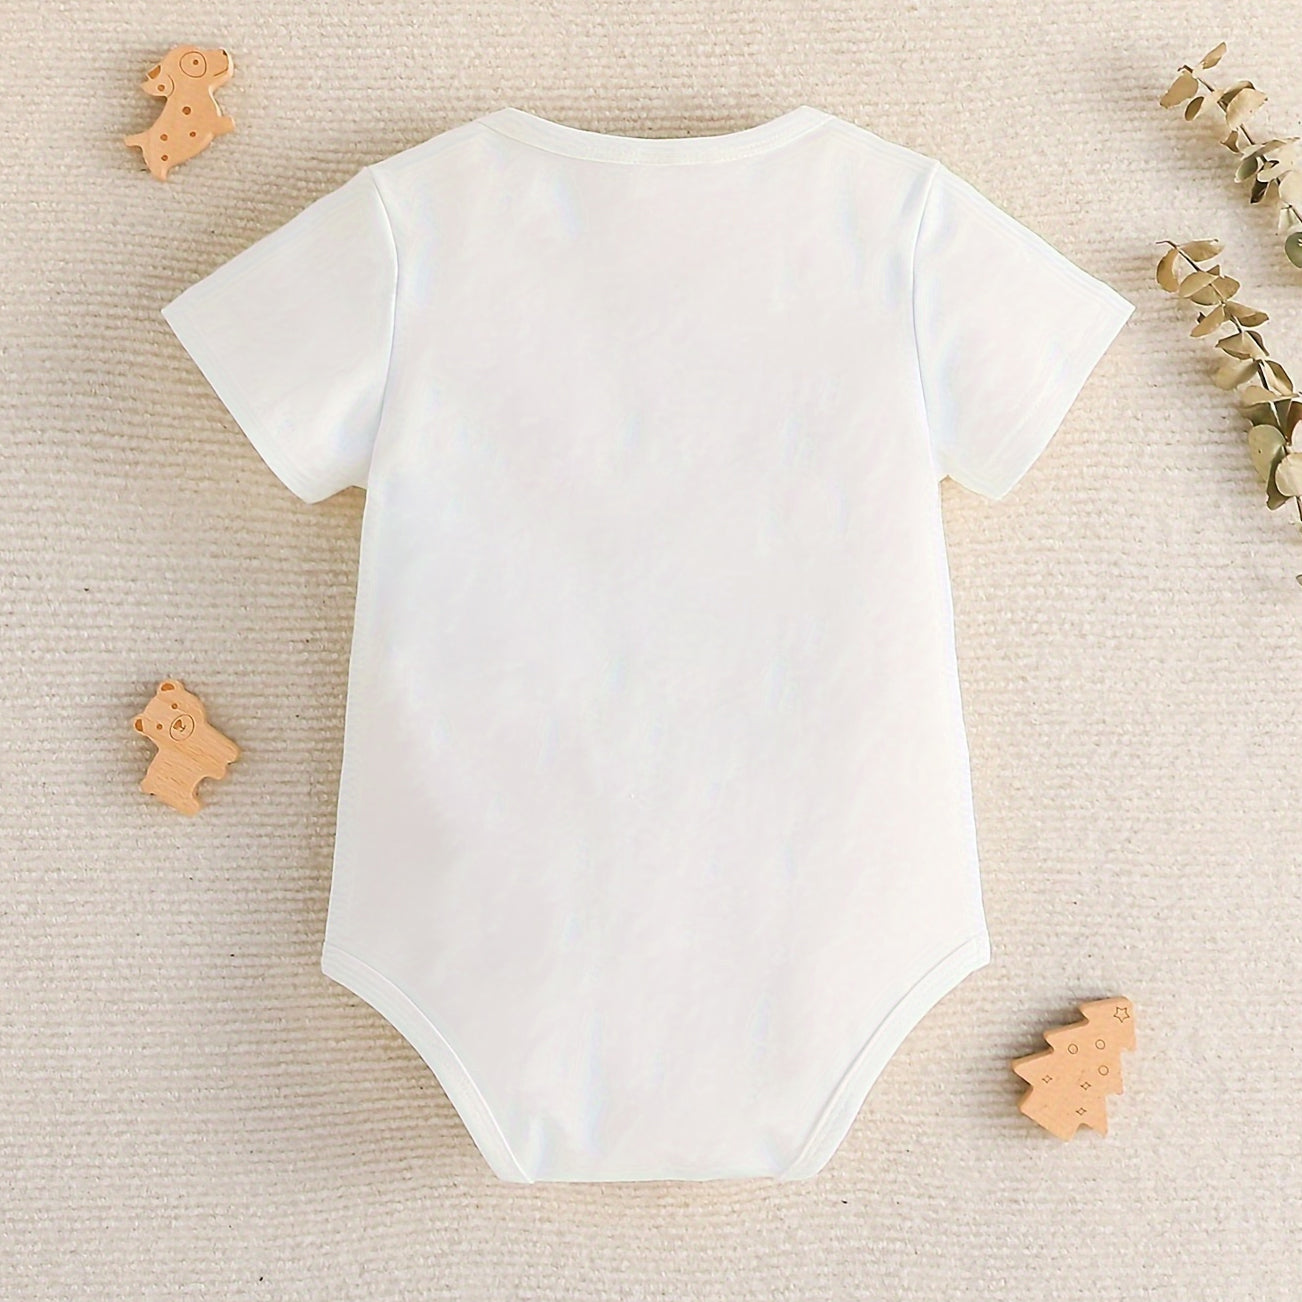 2PCS Pack My Diapers Letter Printed Short Sleeve Baby Romper